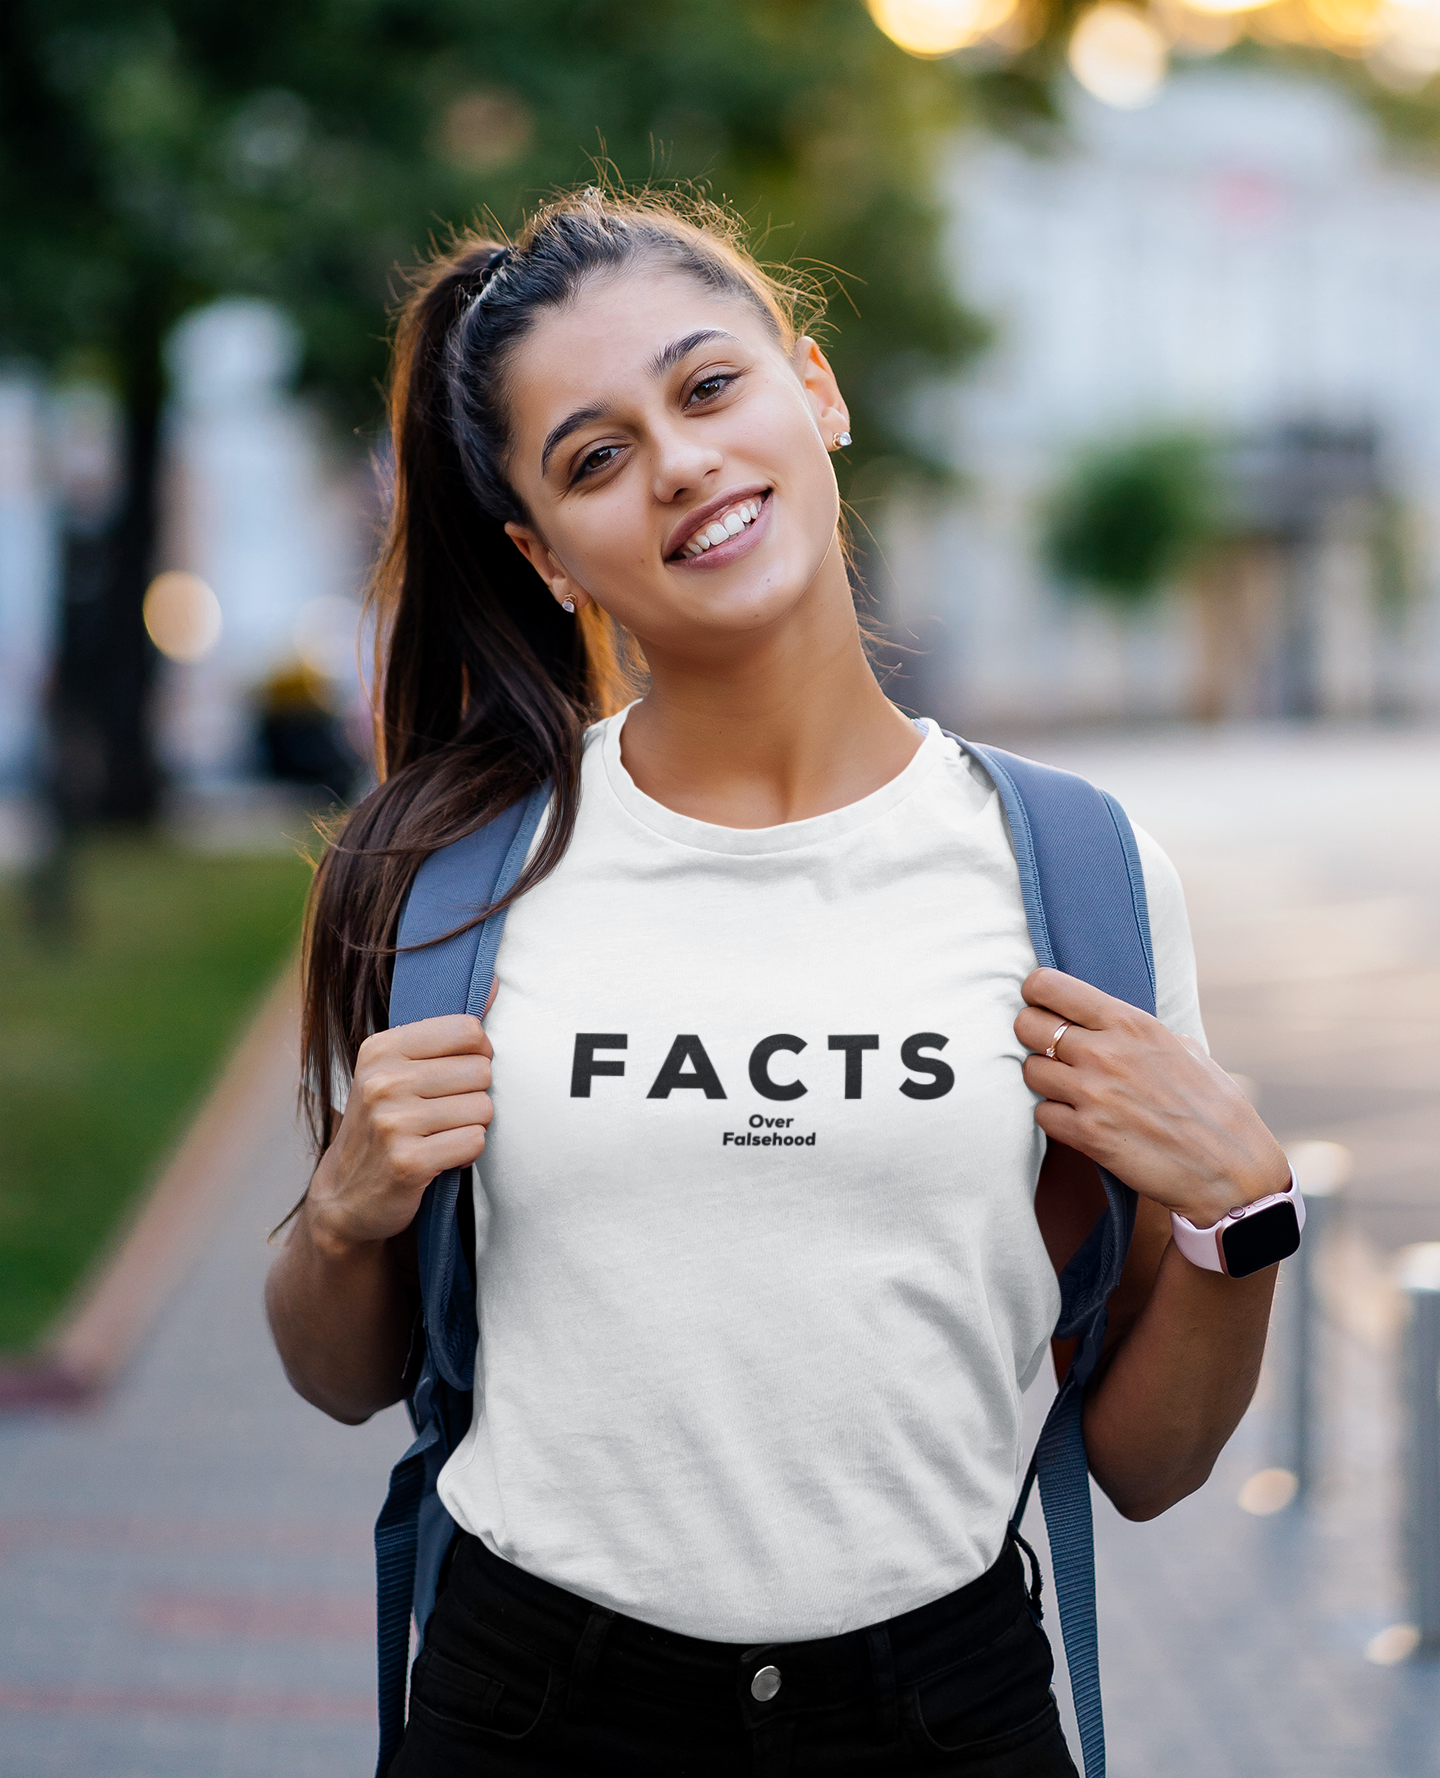 "FACTS Over Falsehood" Youth T-shirt